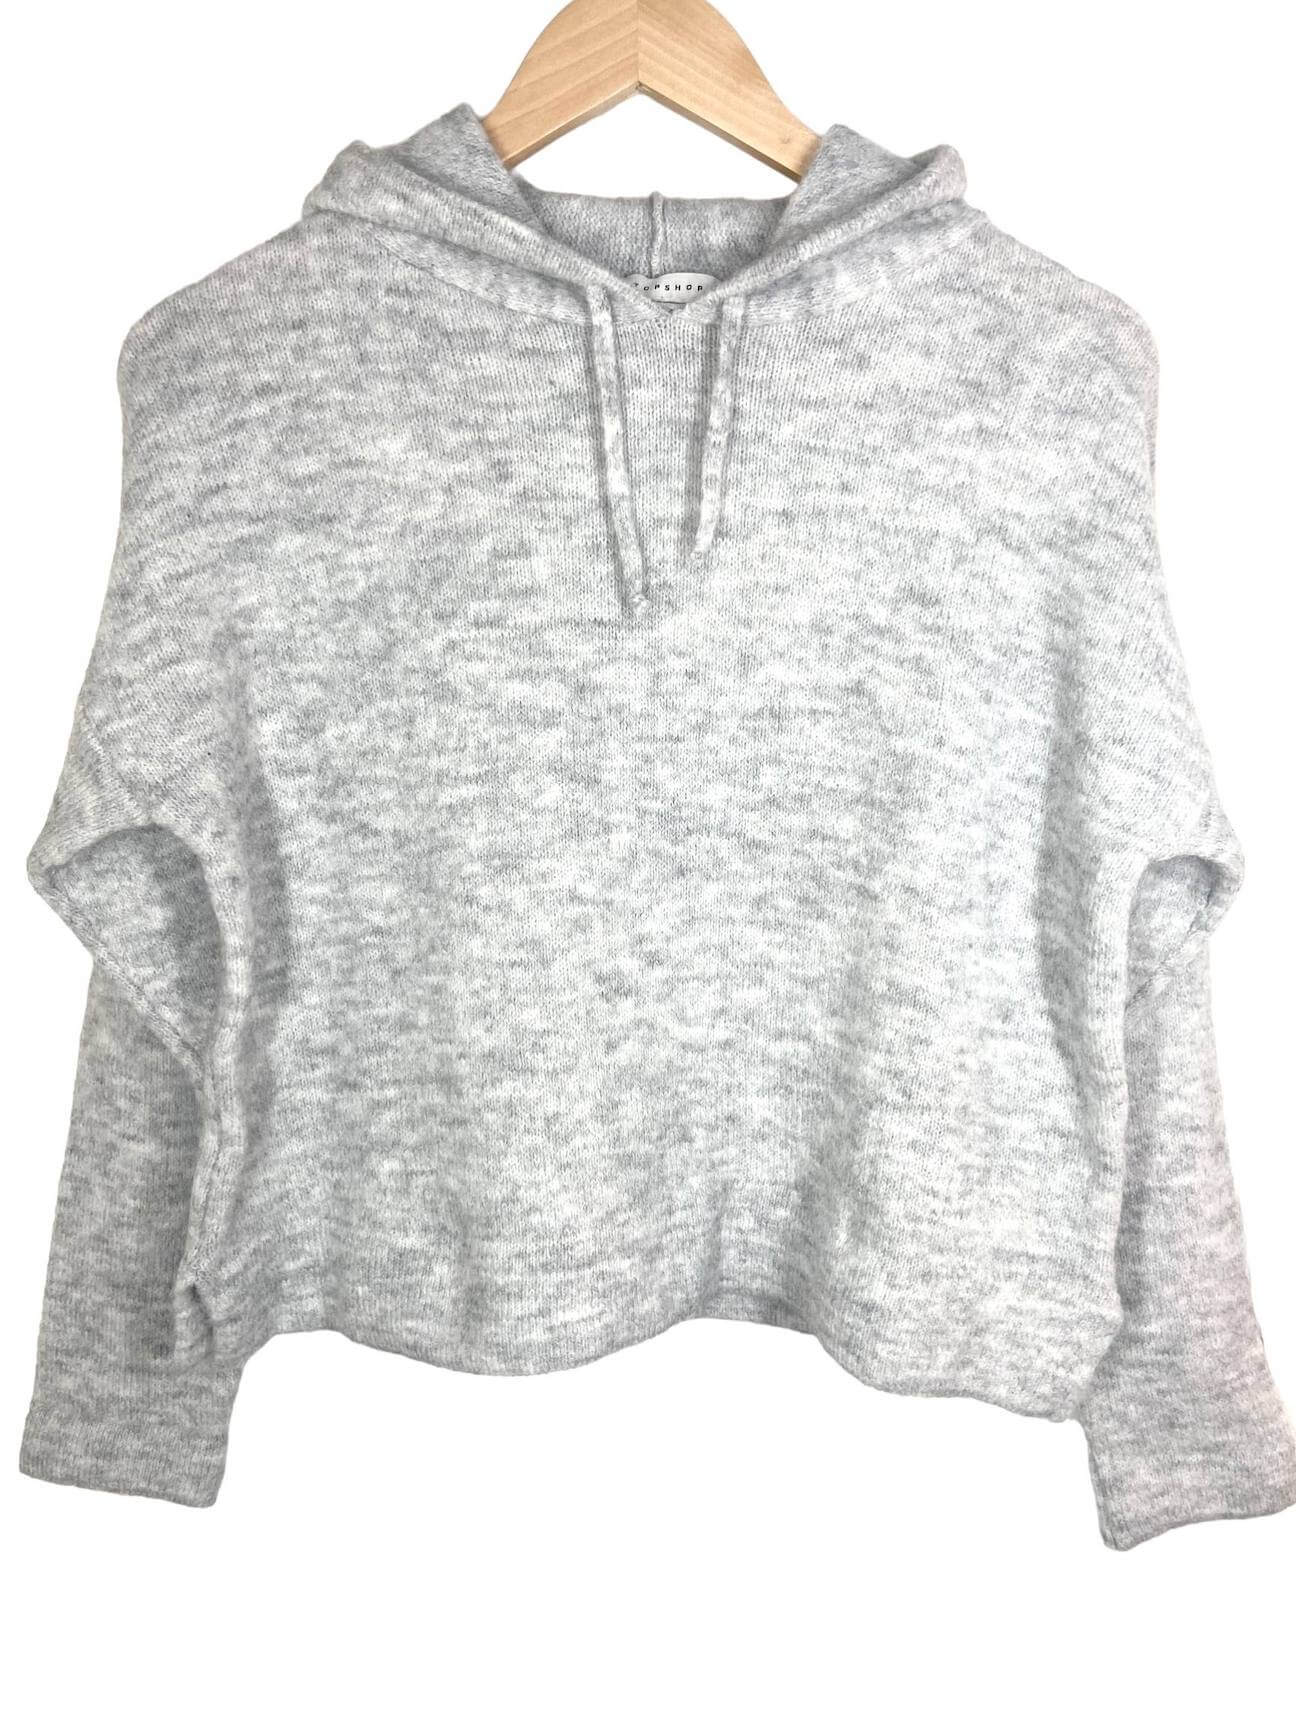 Cool Summer TOPSHOP heather gray hooded sweater